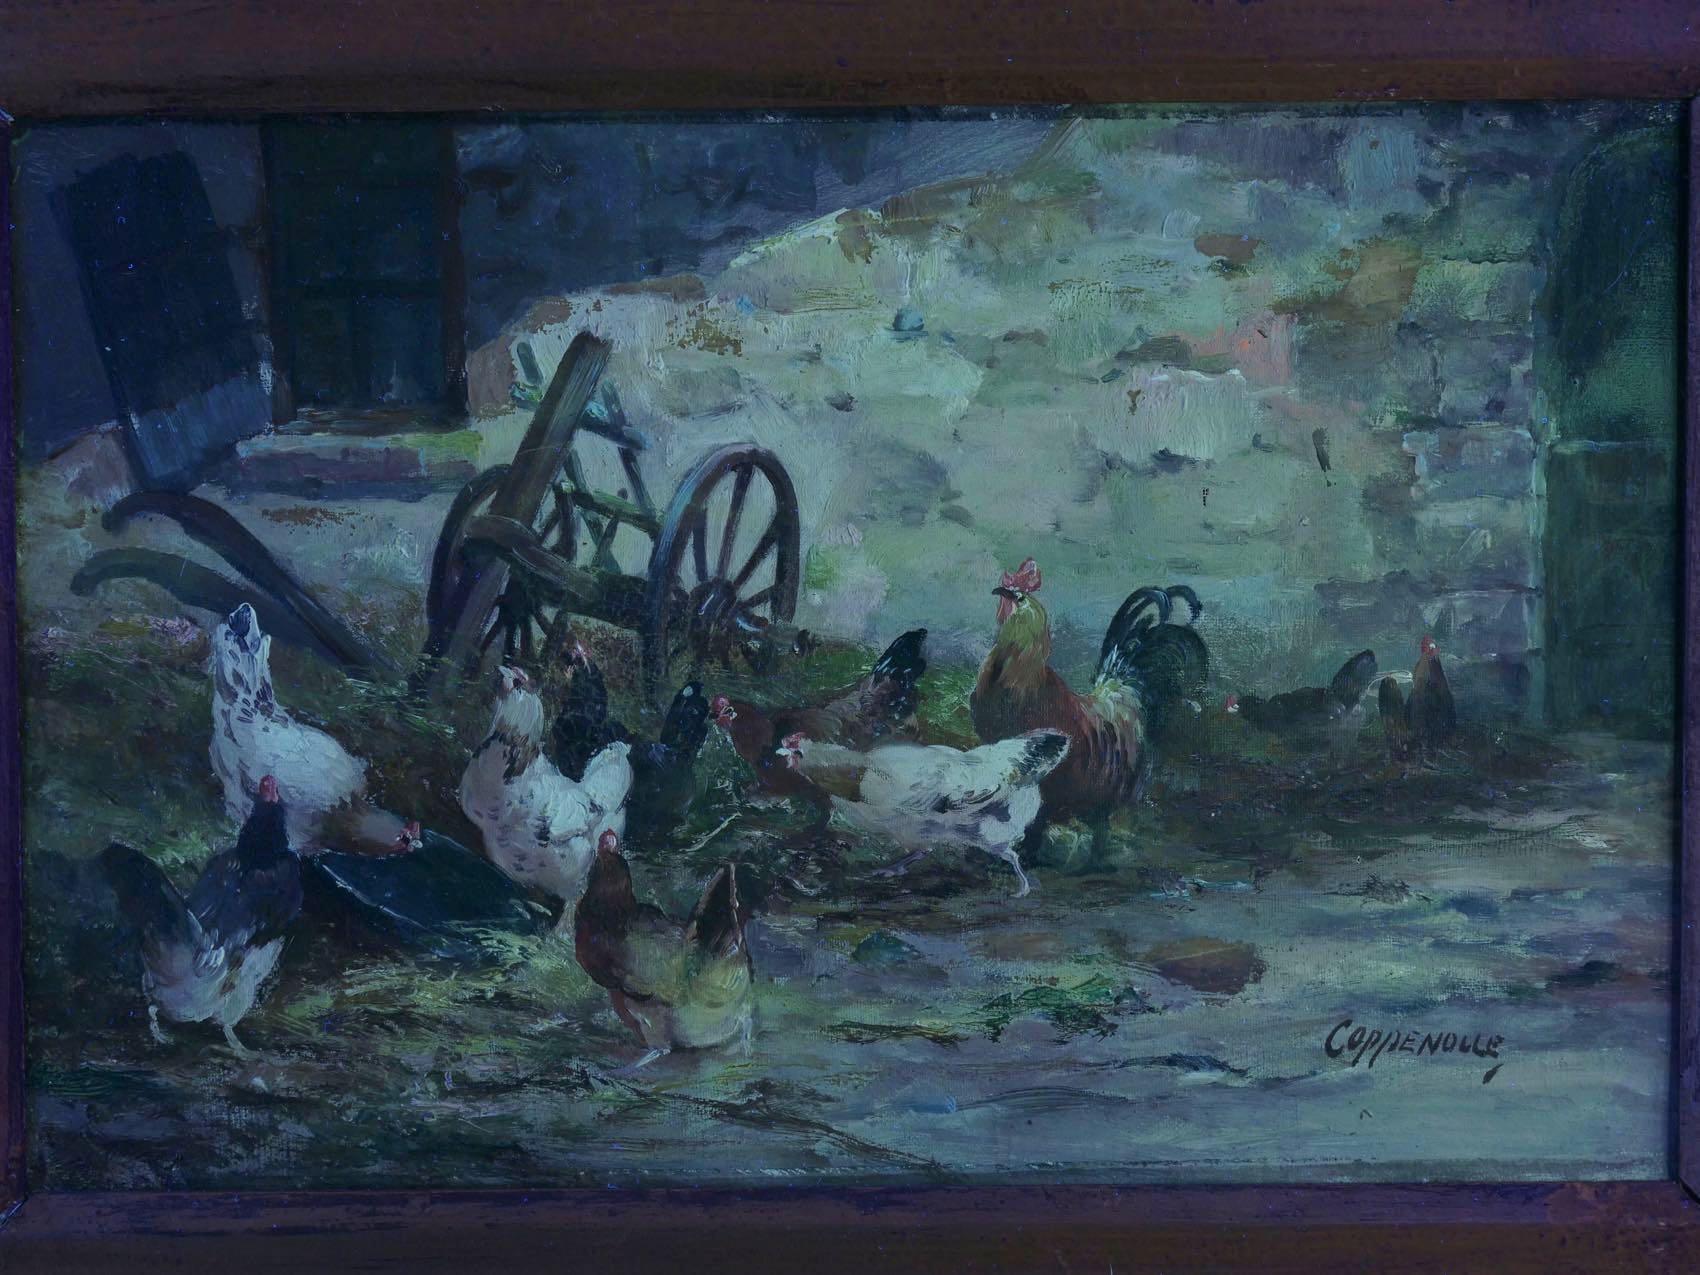 Barnyard Chickens Painting by Jacques van Coppenolle 9